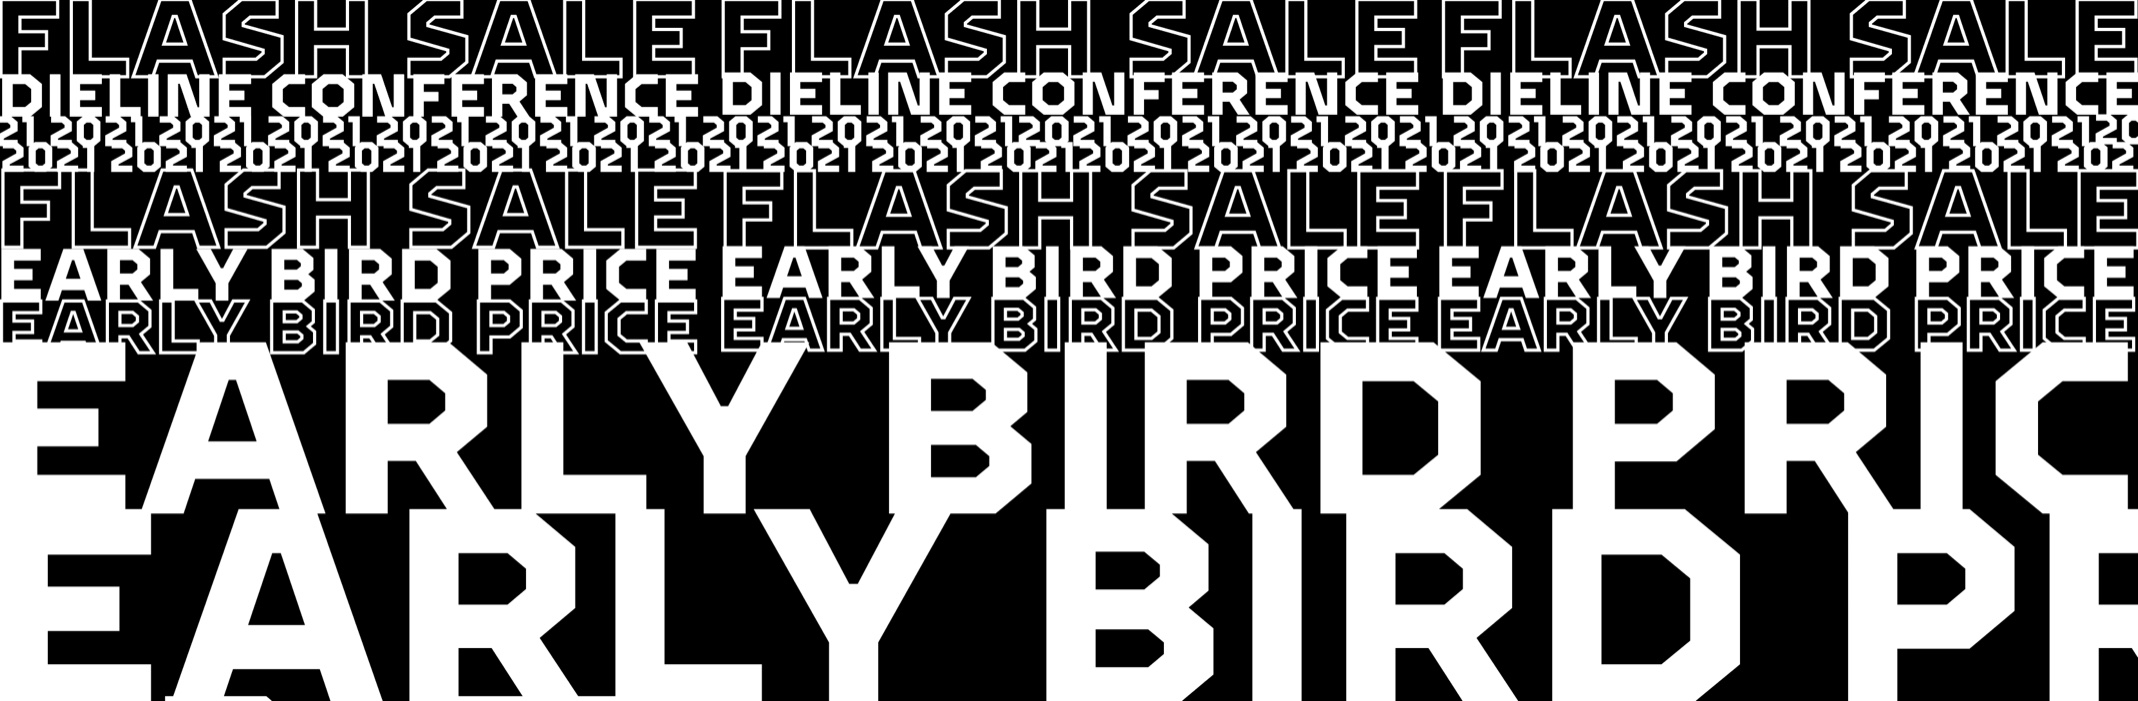 FLASH SALE – This Weekend Only: Dieline Conference 2021